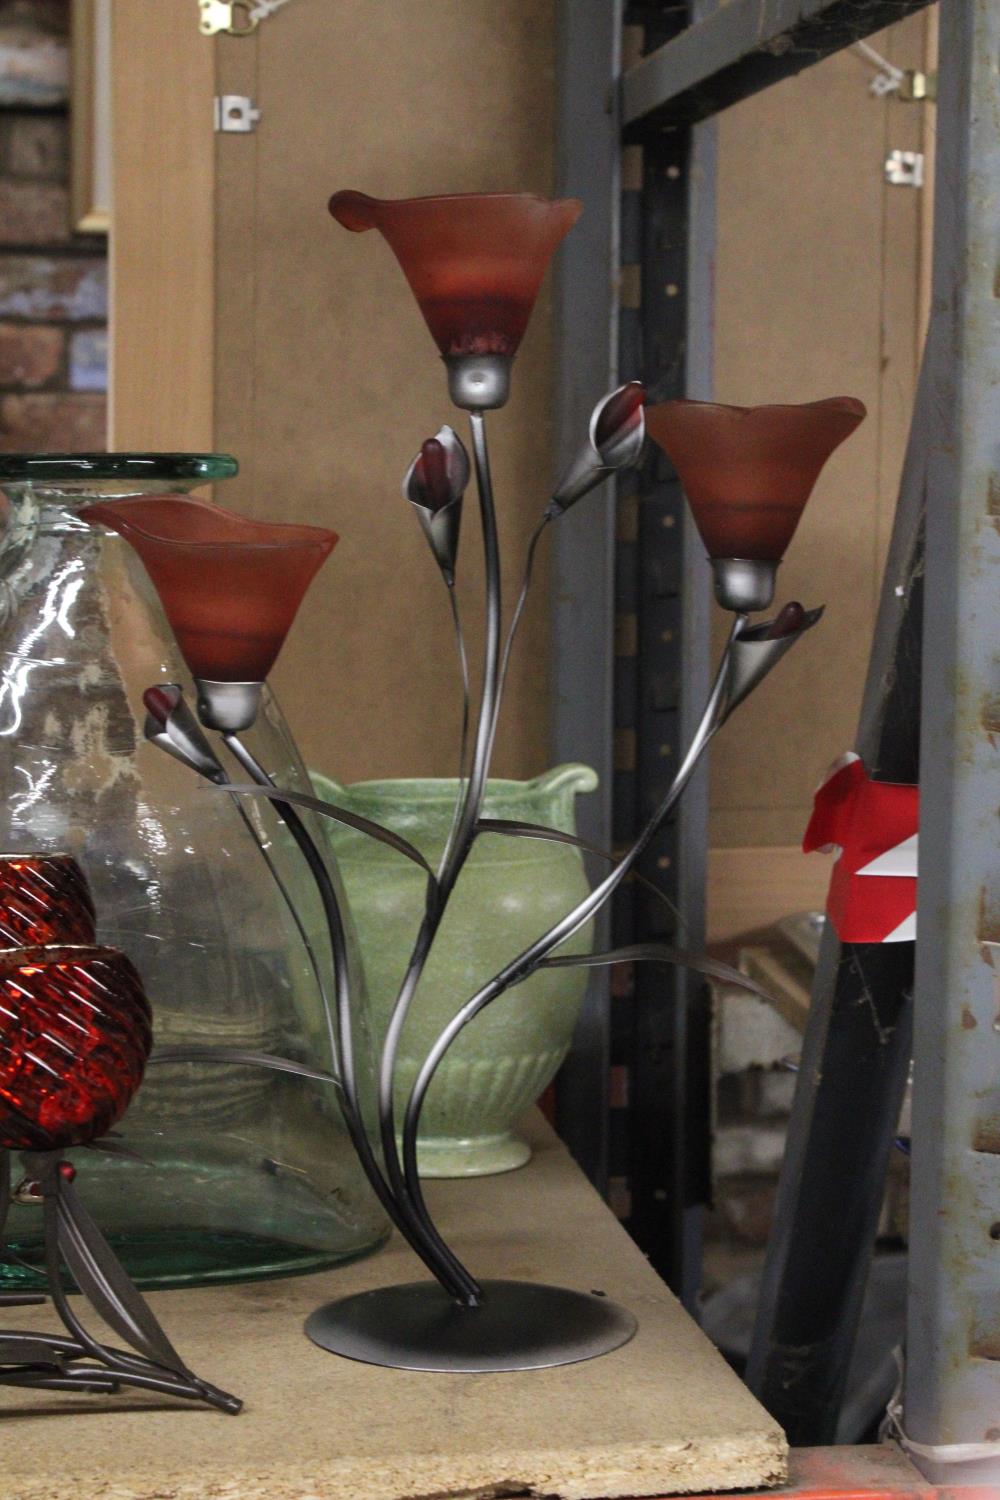 A THREE MODERN GLASS FLOWER DESIGN METAL CANDLE HOLDERS PLUS LARGE GLASS VASE - Image 3 of 4